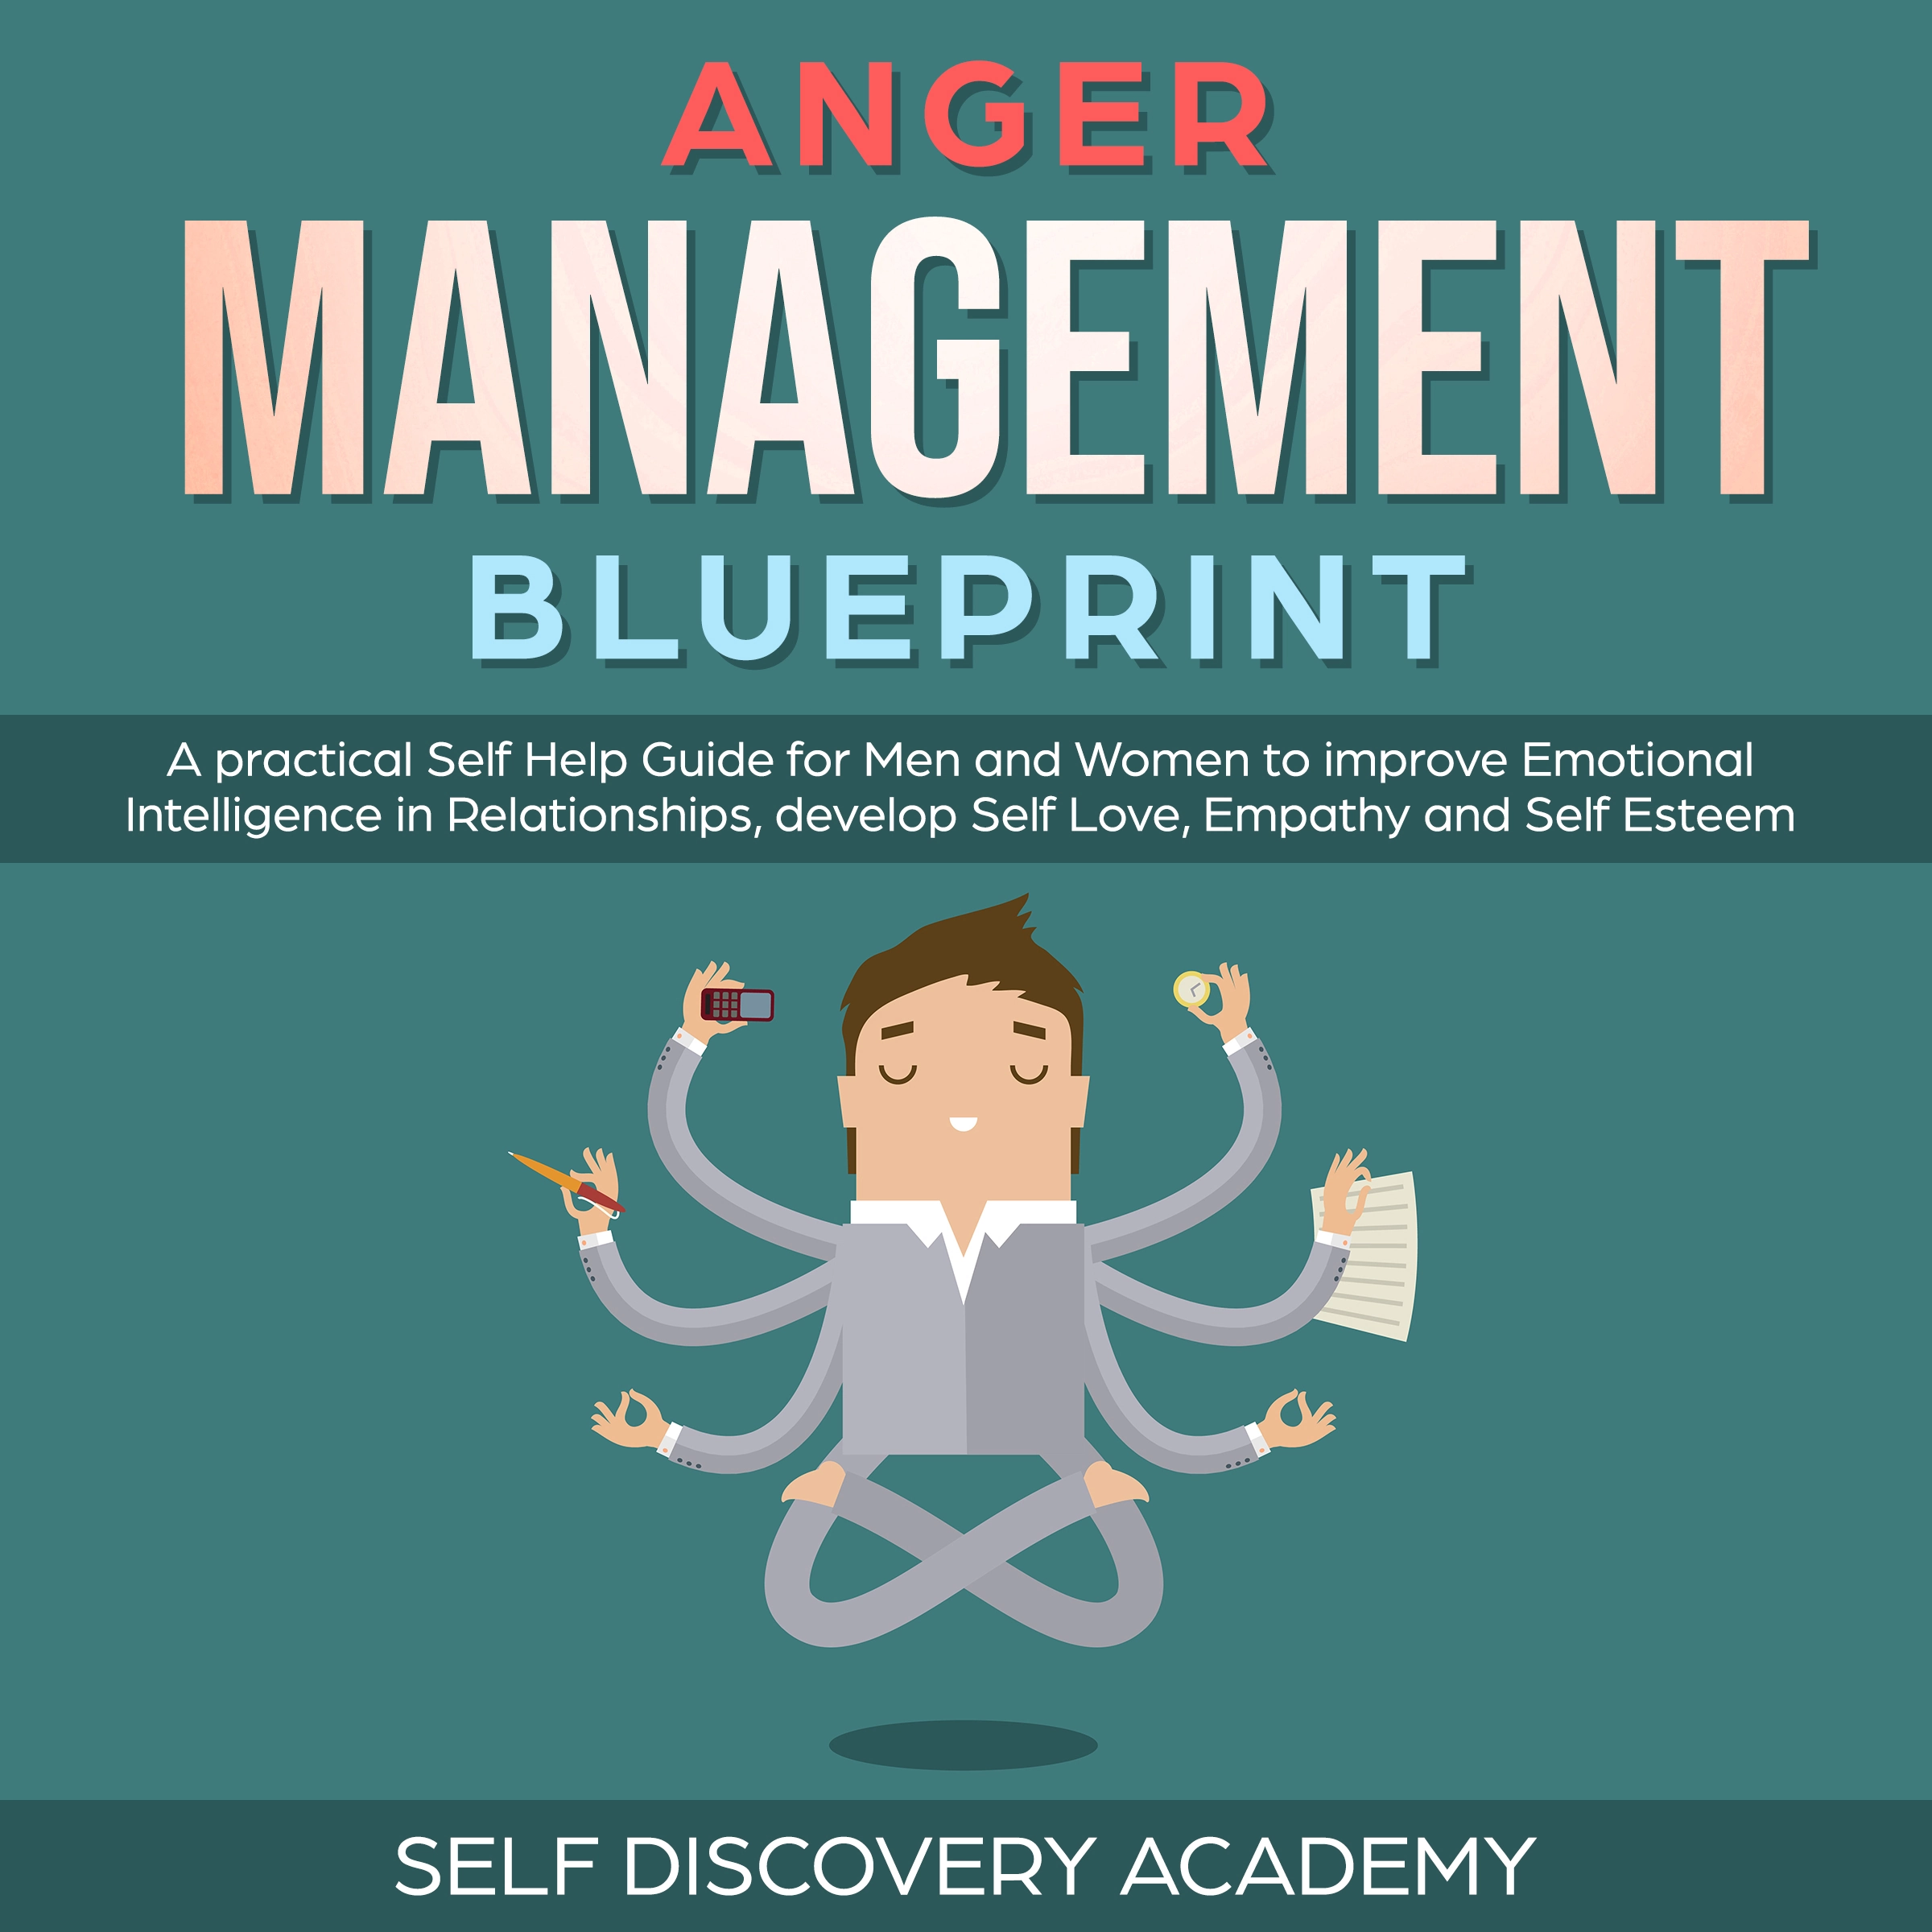 Anger Management Blueprint: A practical Self Help Guide for Men and Women to improve Emotional Intelligence in Relationships, develop Self Love, Empathy and Self Esteem (Self Discovery Book 3) Audiobook by Self Discovery Academy